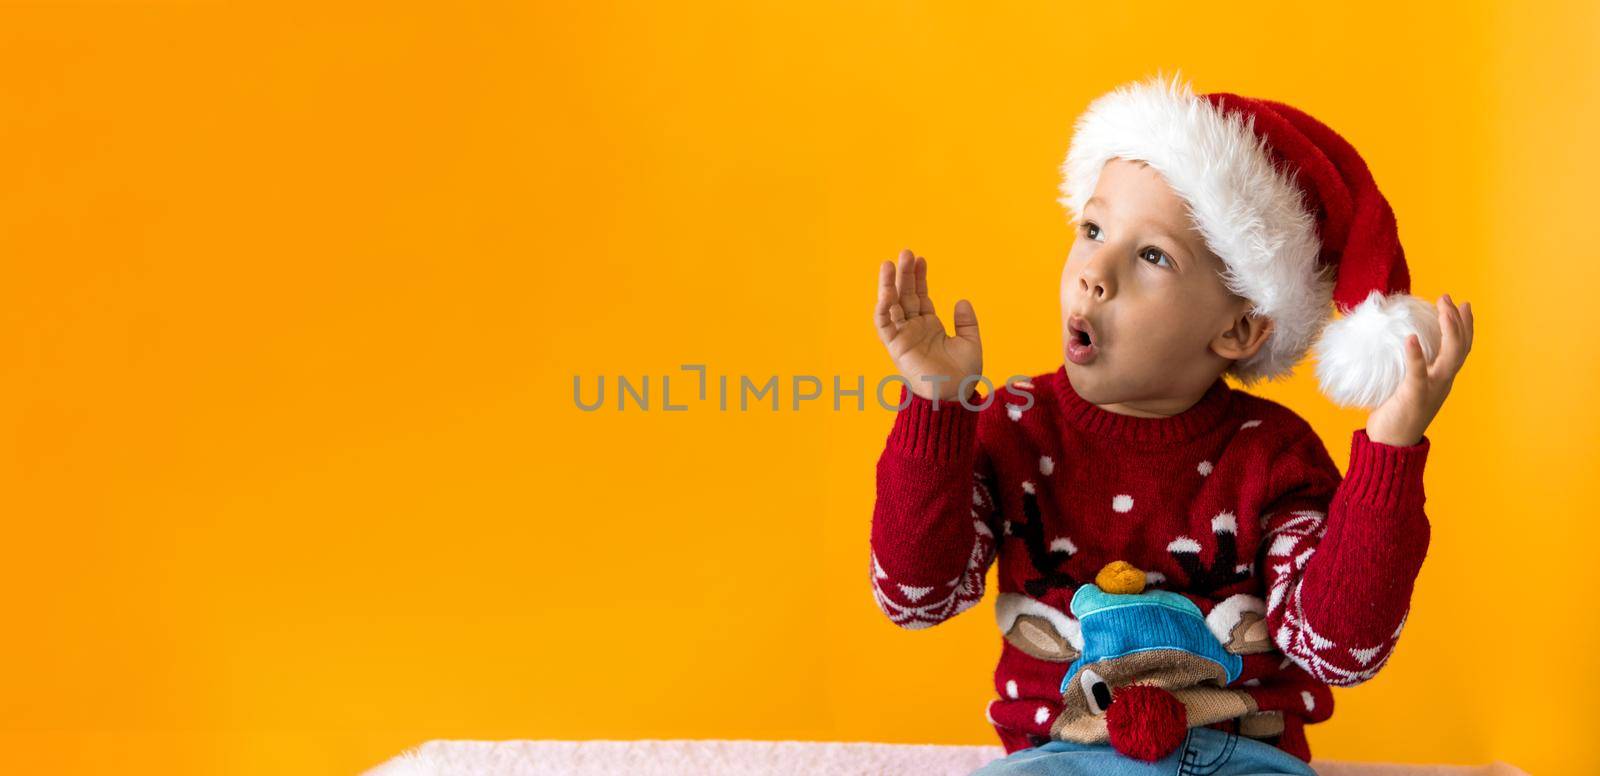 Portrait of happy smiling positive joyful positive preschool little boy in red warm santa hat showing thumb up on orange, yellow background. Winter, holiday, celebration, Christmas, New Year copy space.